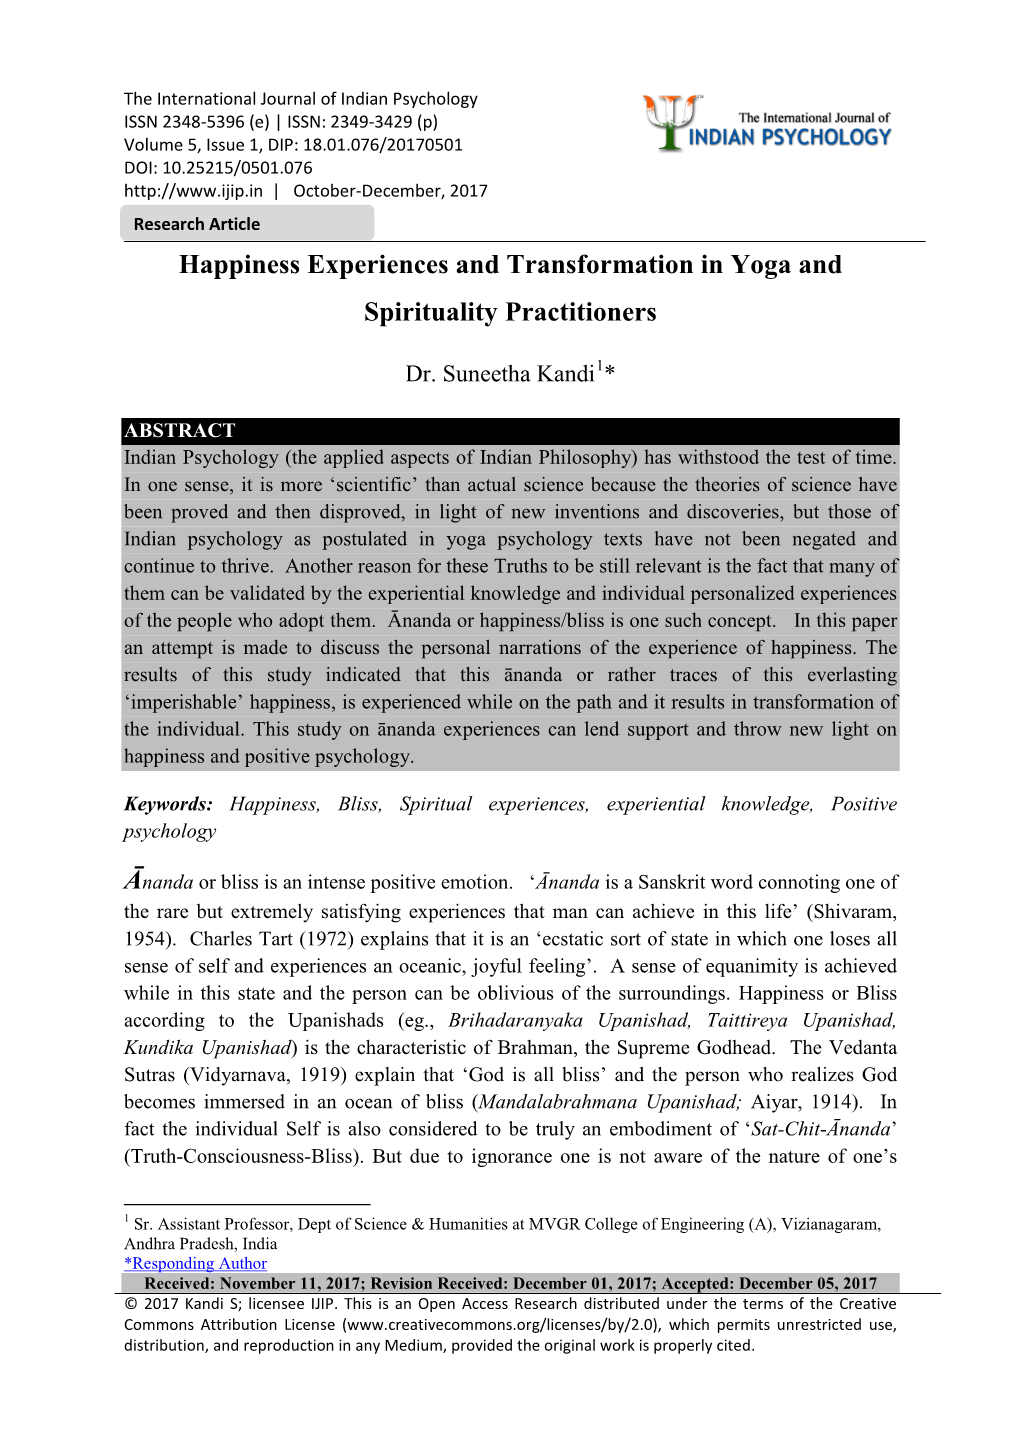 Happiness Experiences and Transformation in Yoga and Spirituality Practitioners